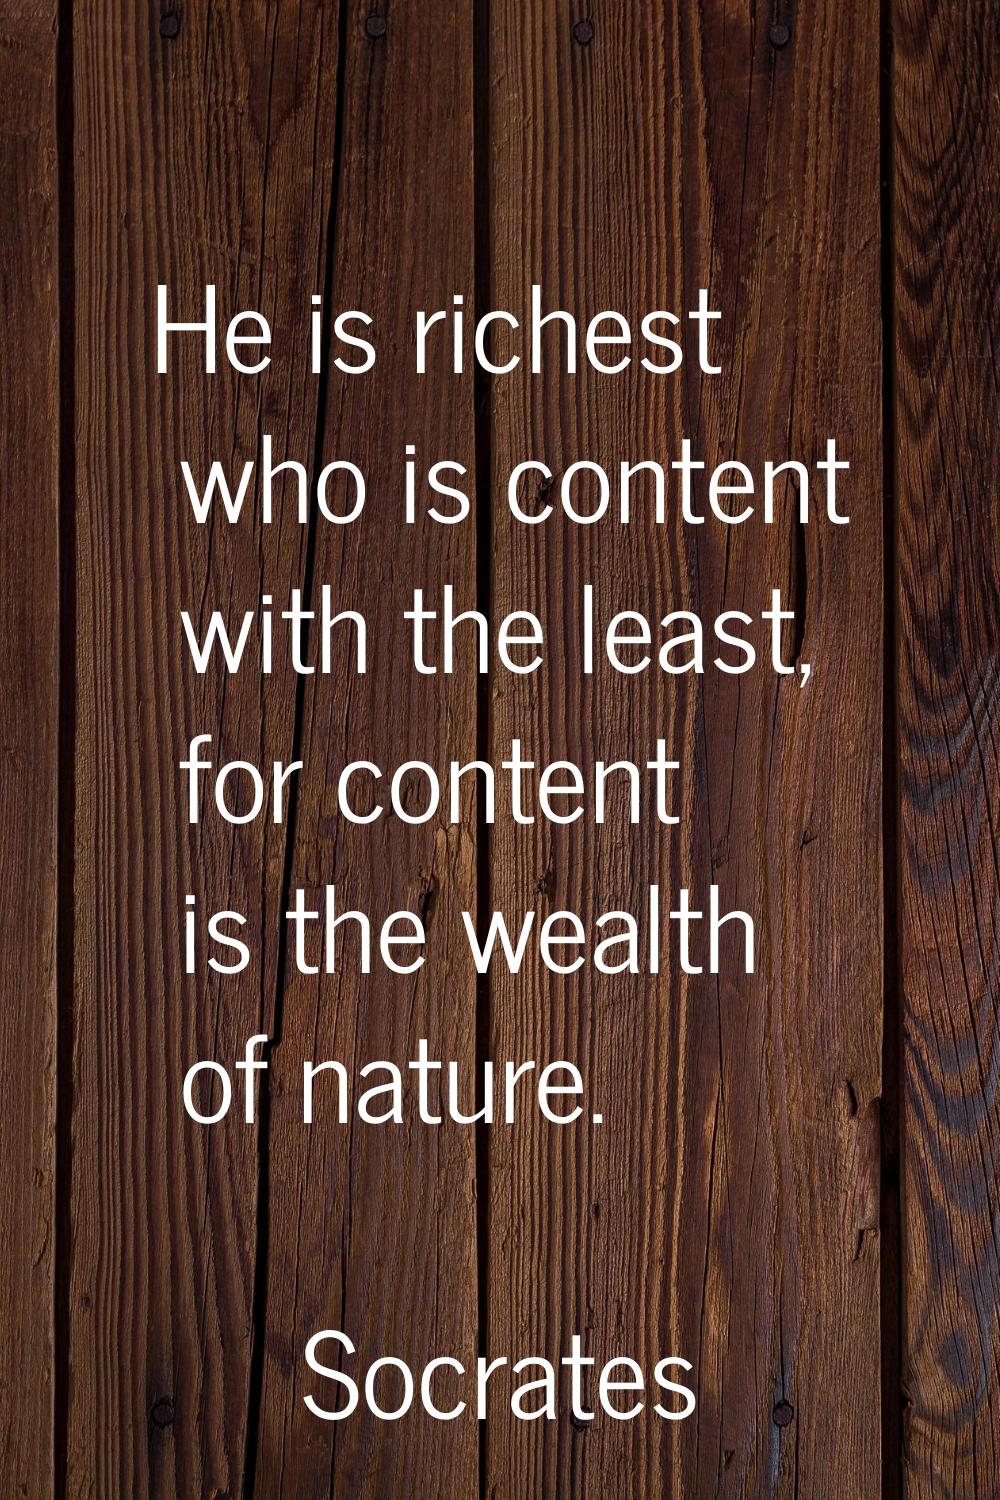 He is richest who is content with the least, for content is the wealth of nature.